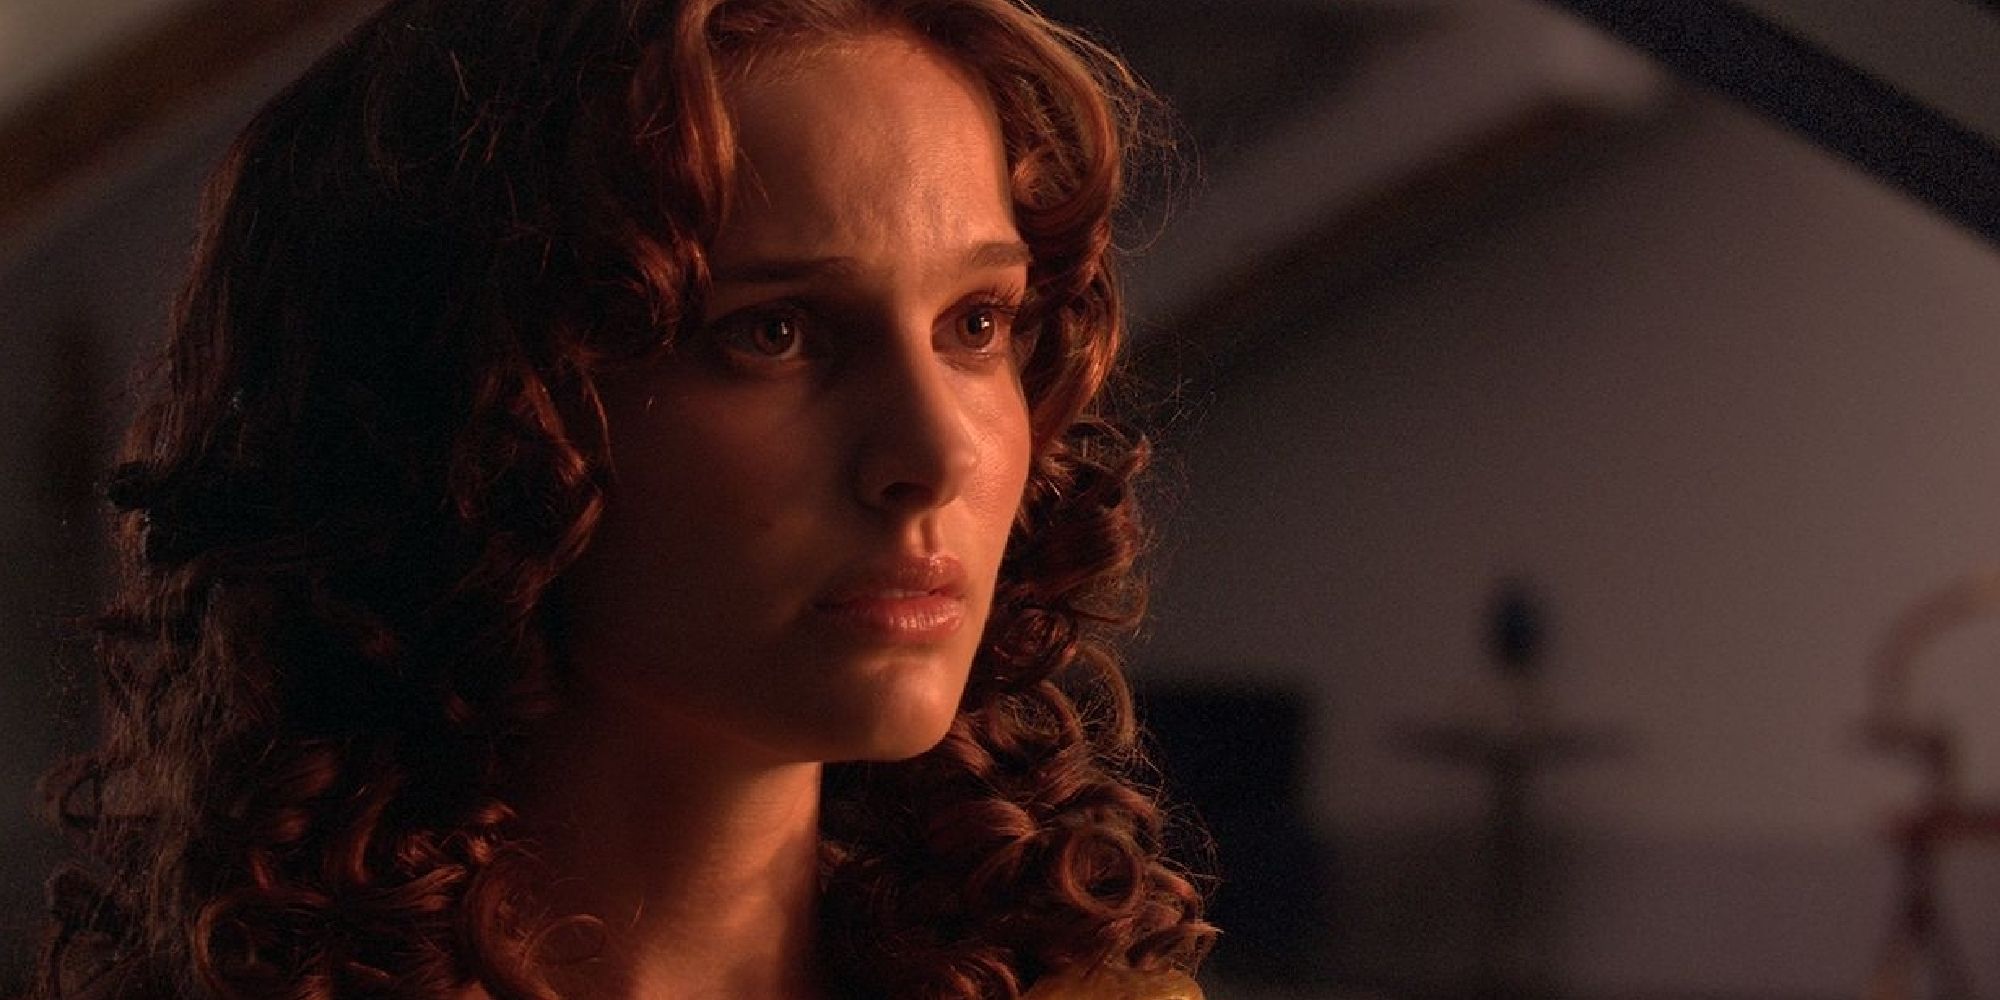 A close-up of Natalie Portman as Padmé in Revenge of the Sith